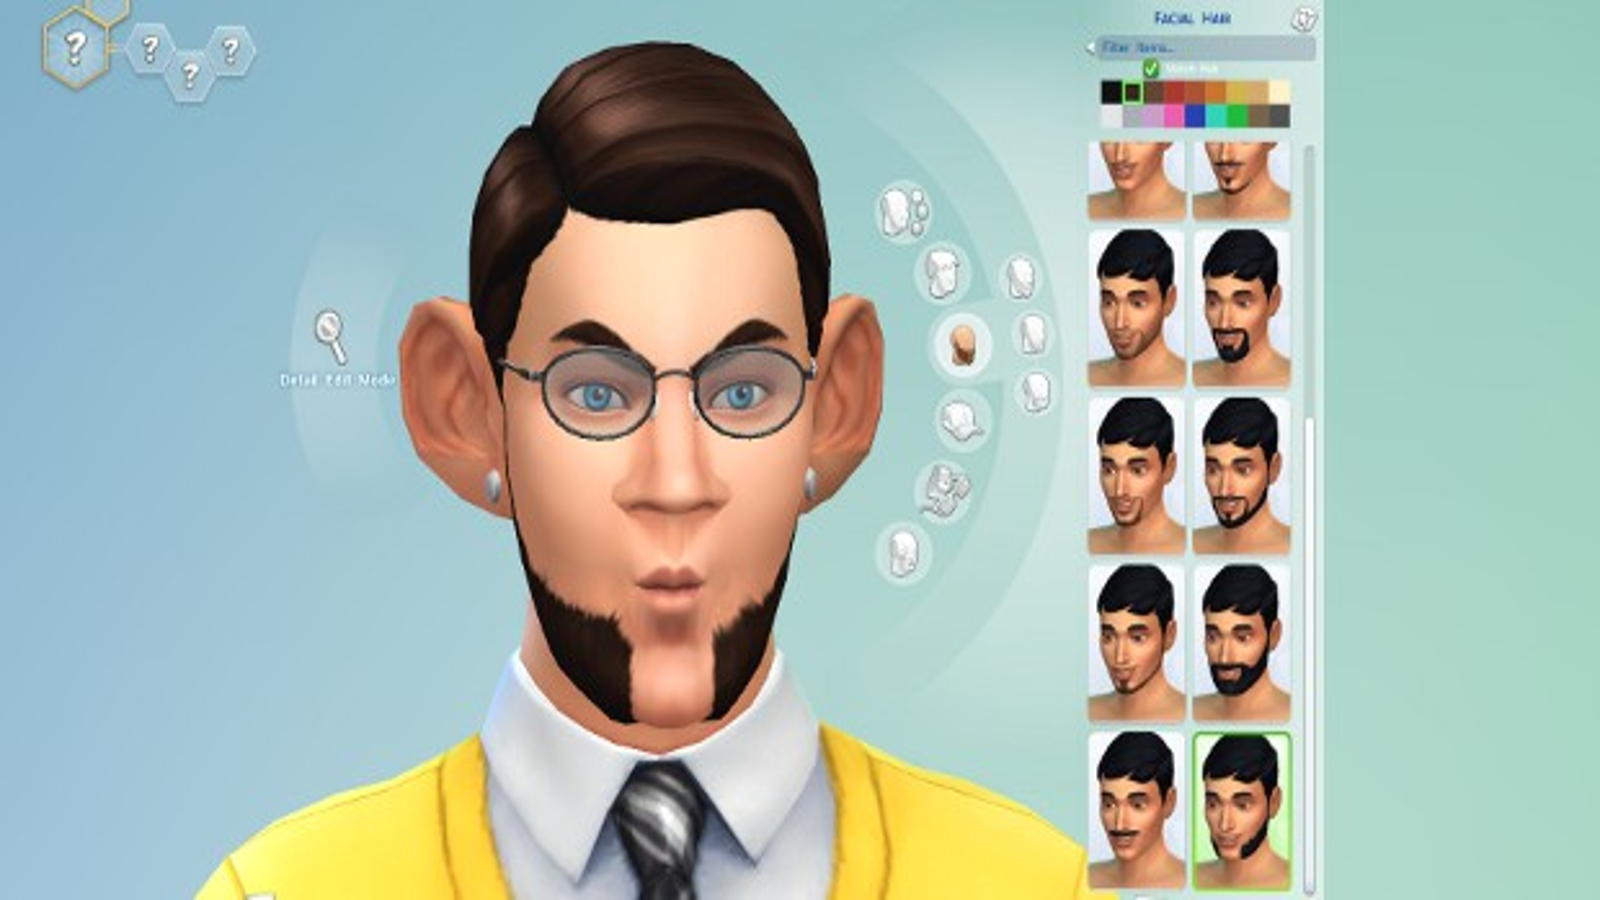 Build-A-Youth: The Sims 4's Character Creator Demo